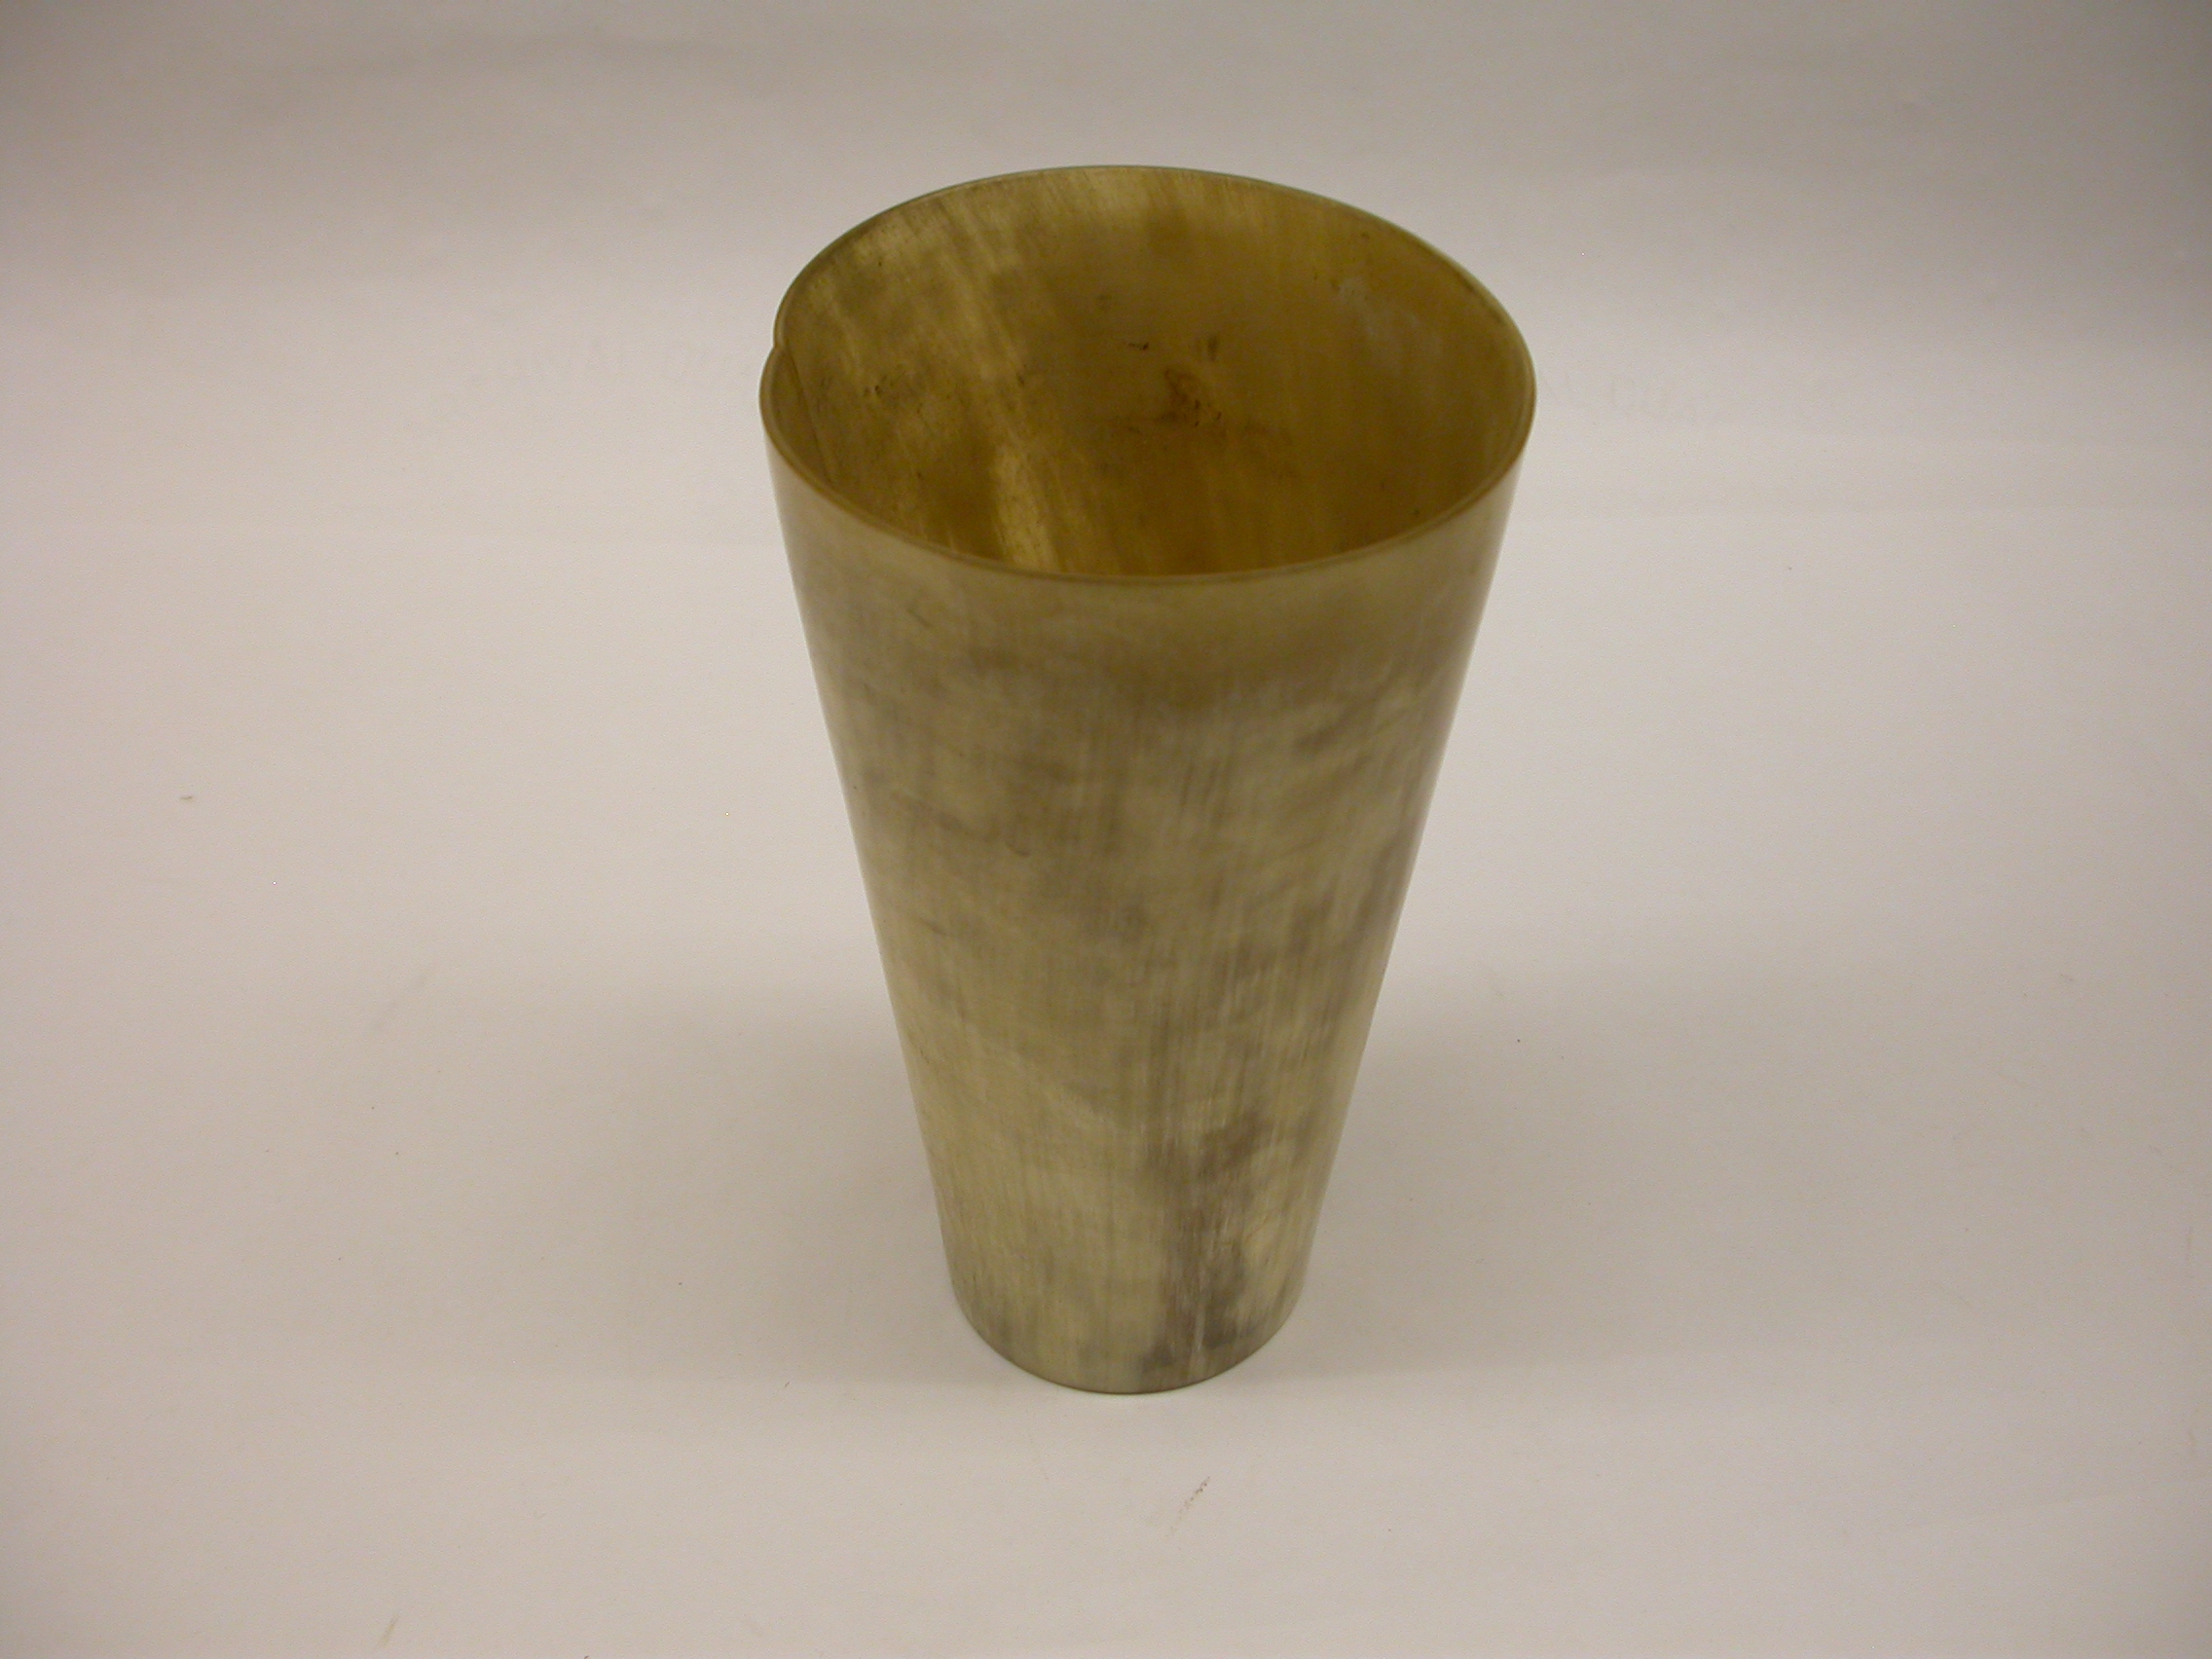 a%20tumbler%20cup%20made%20of%20horn%20wood